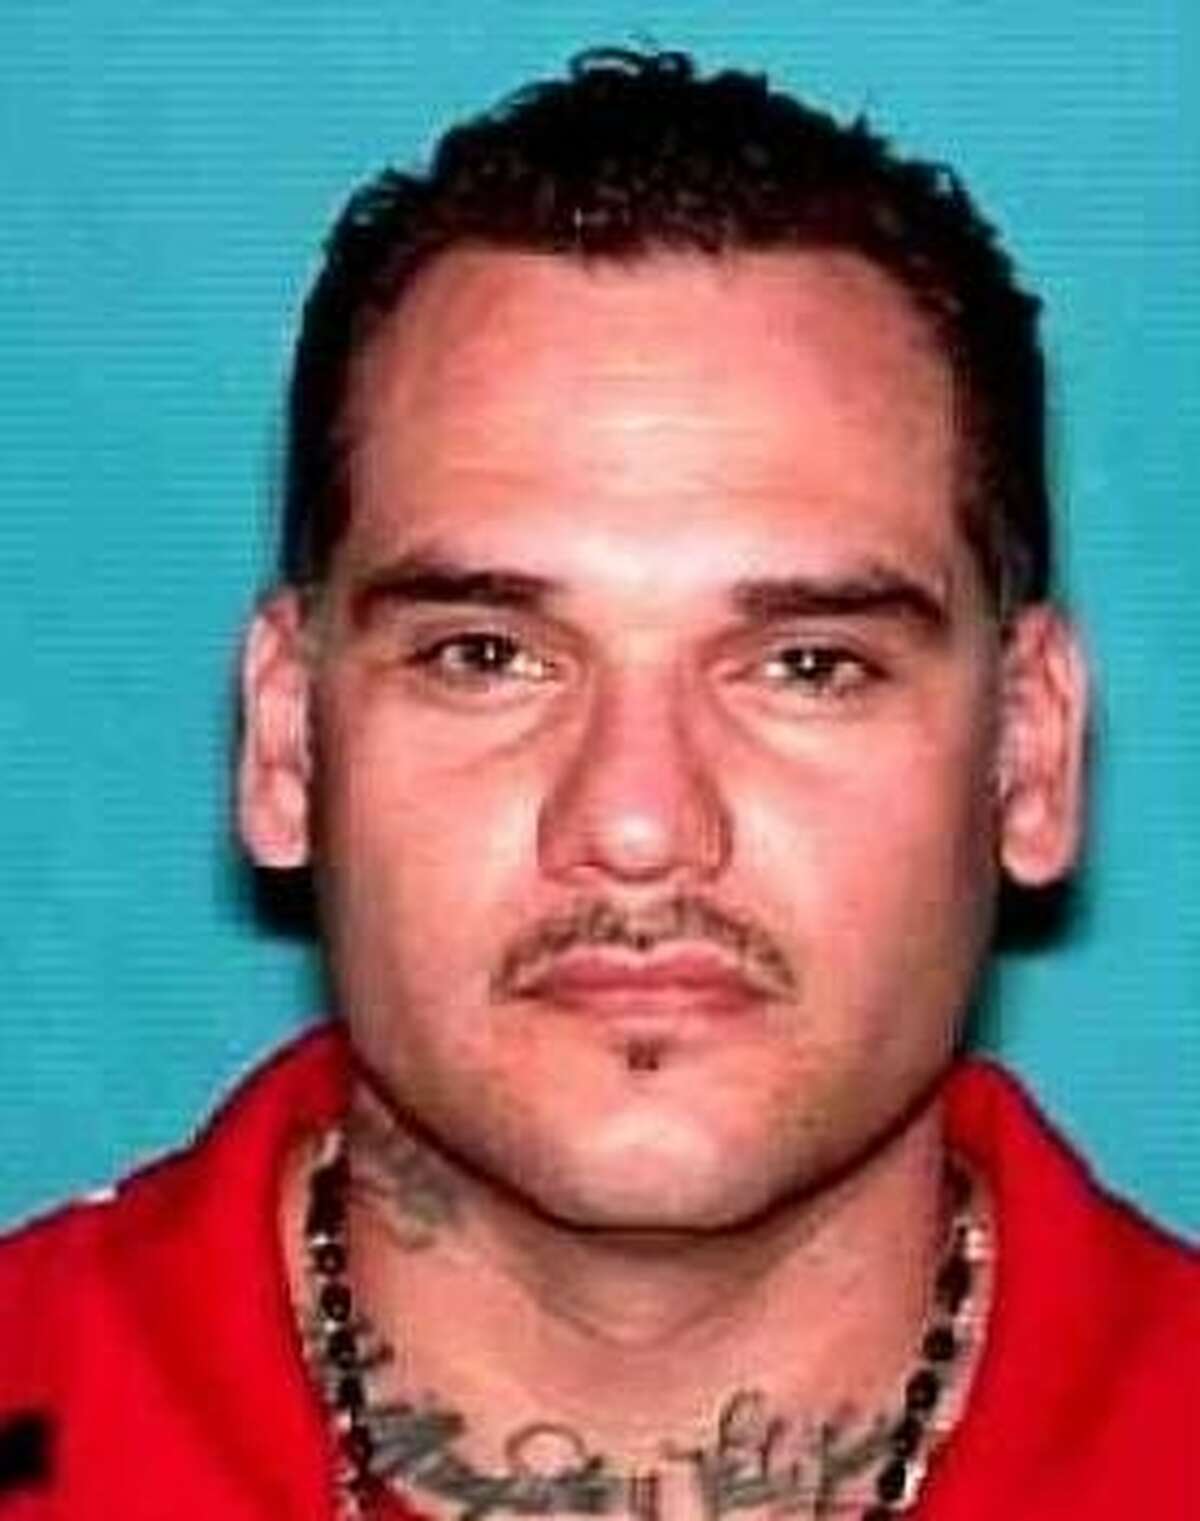 Texas 10 Most Wanted Fugitives